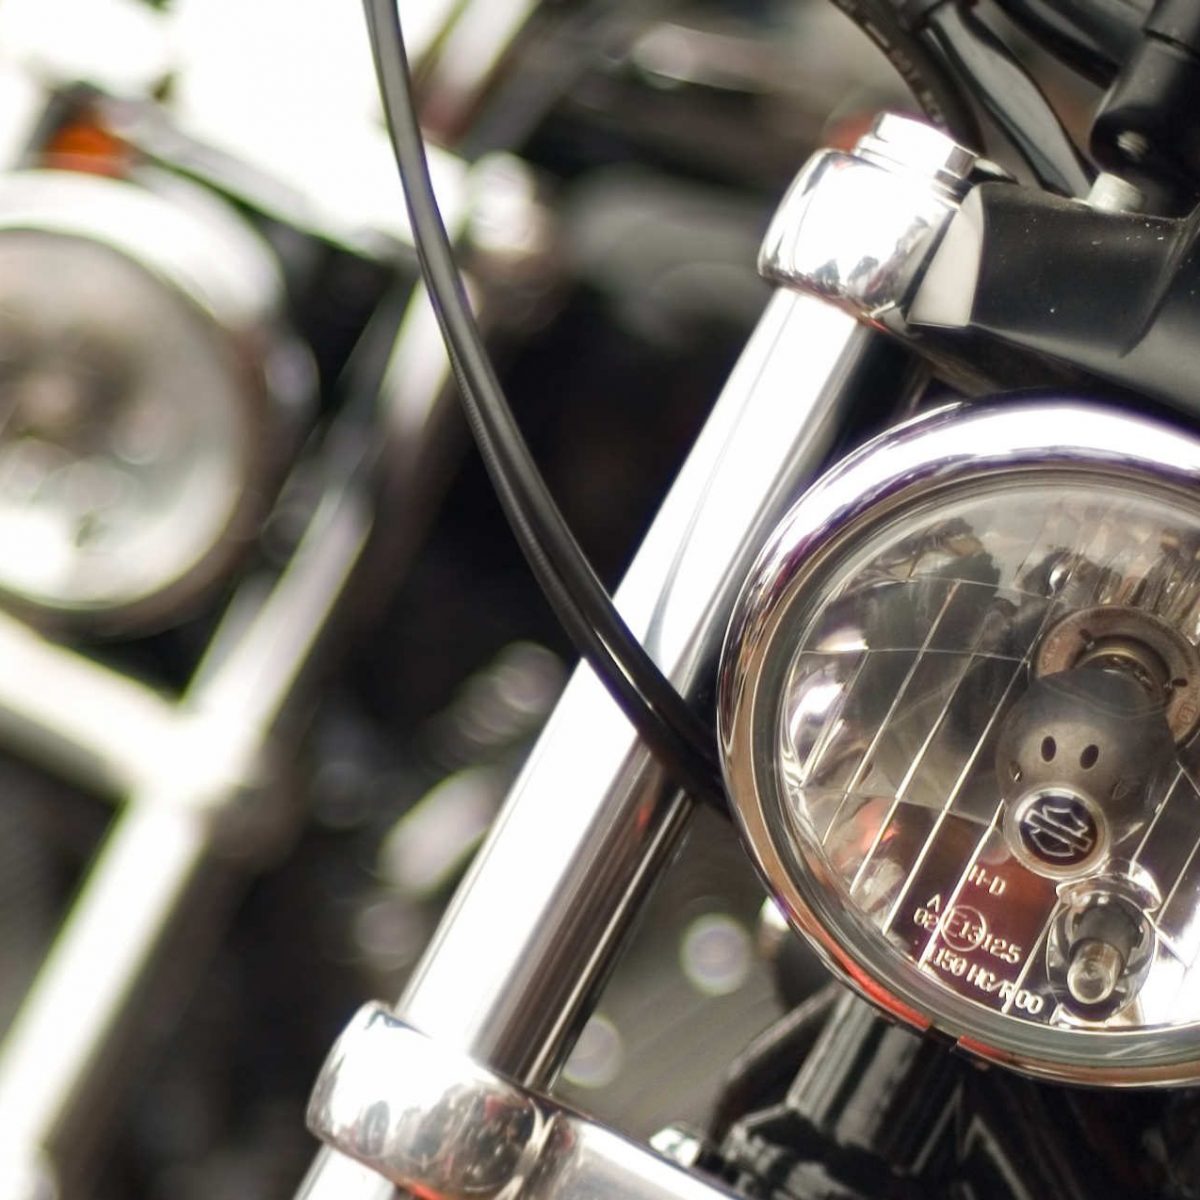 Motorcycle Parts And Accessories